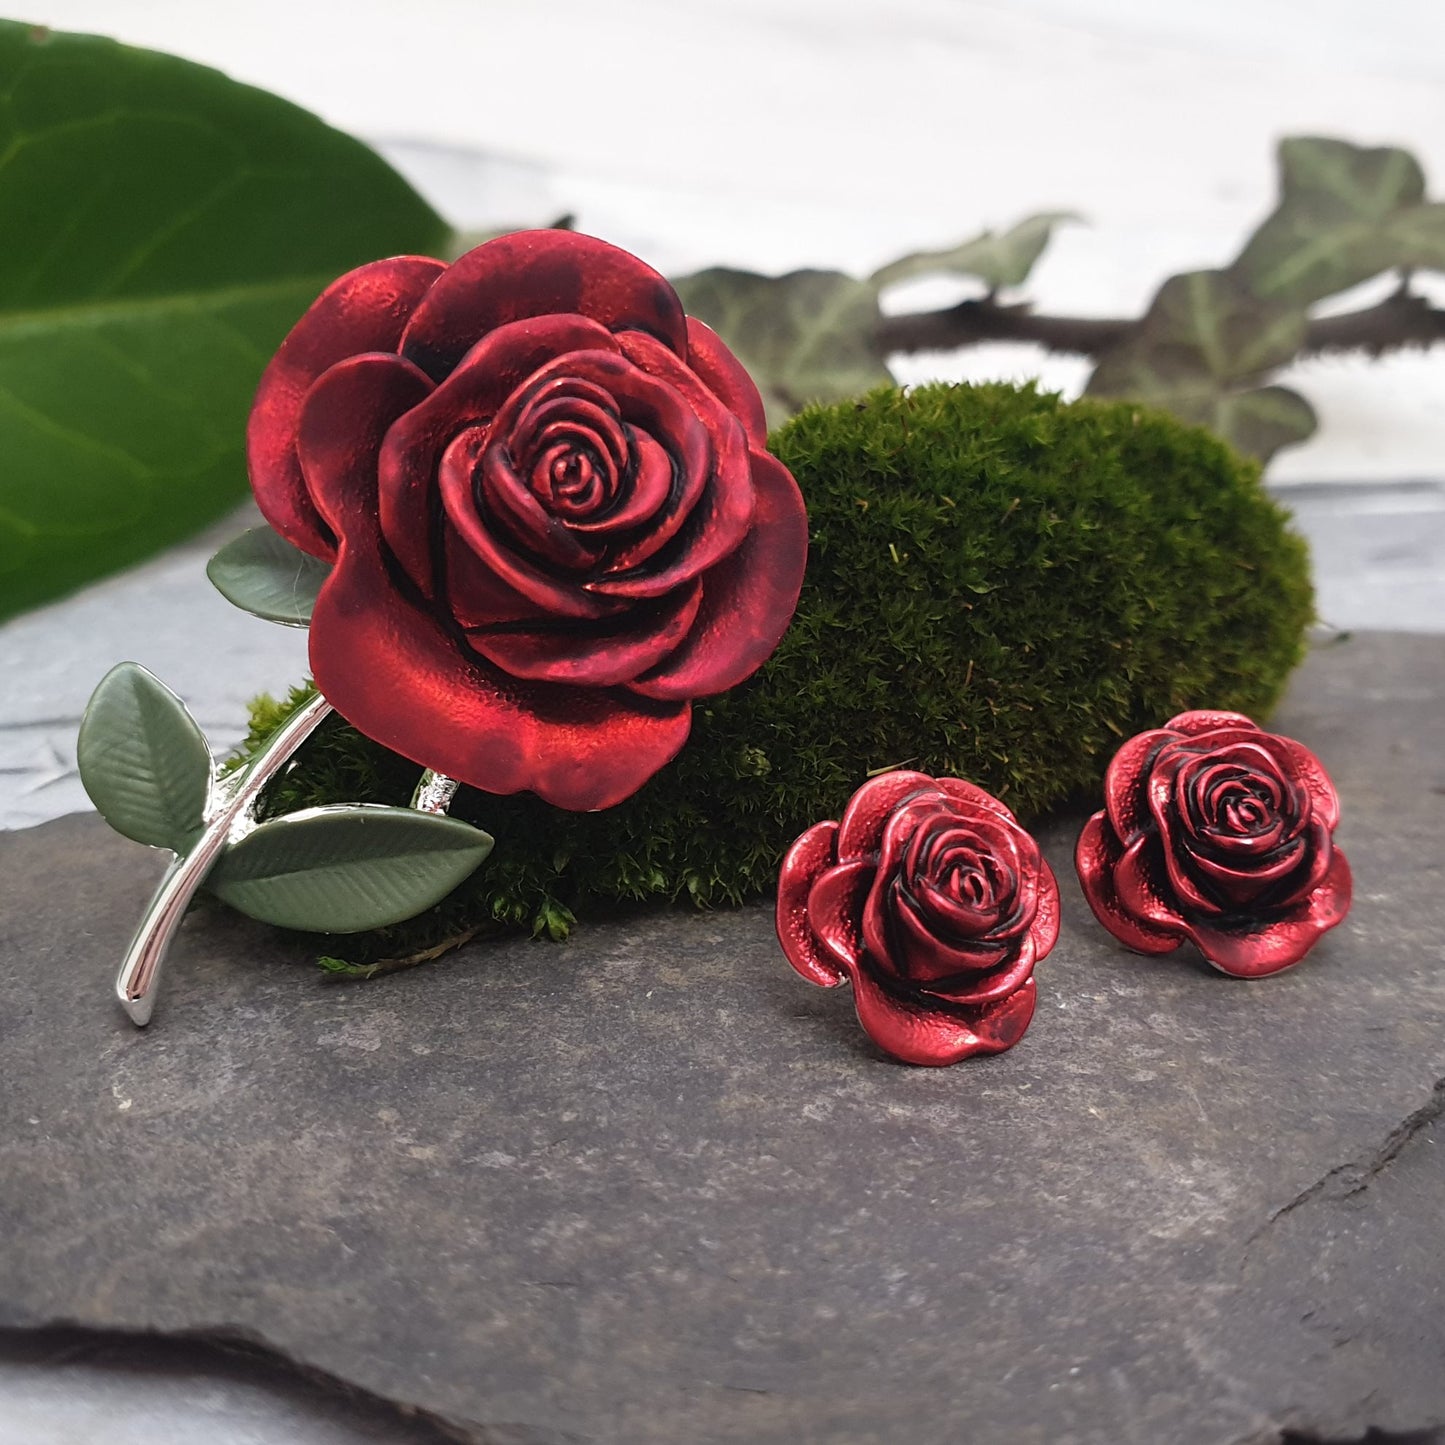 Matching brooch and earring set, both red roses